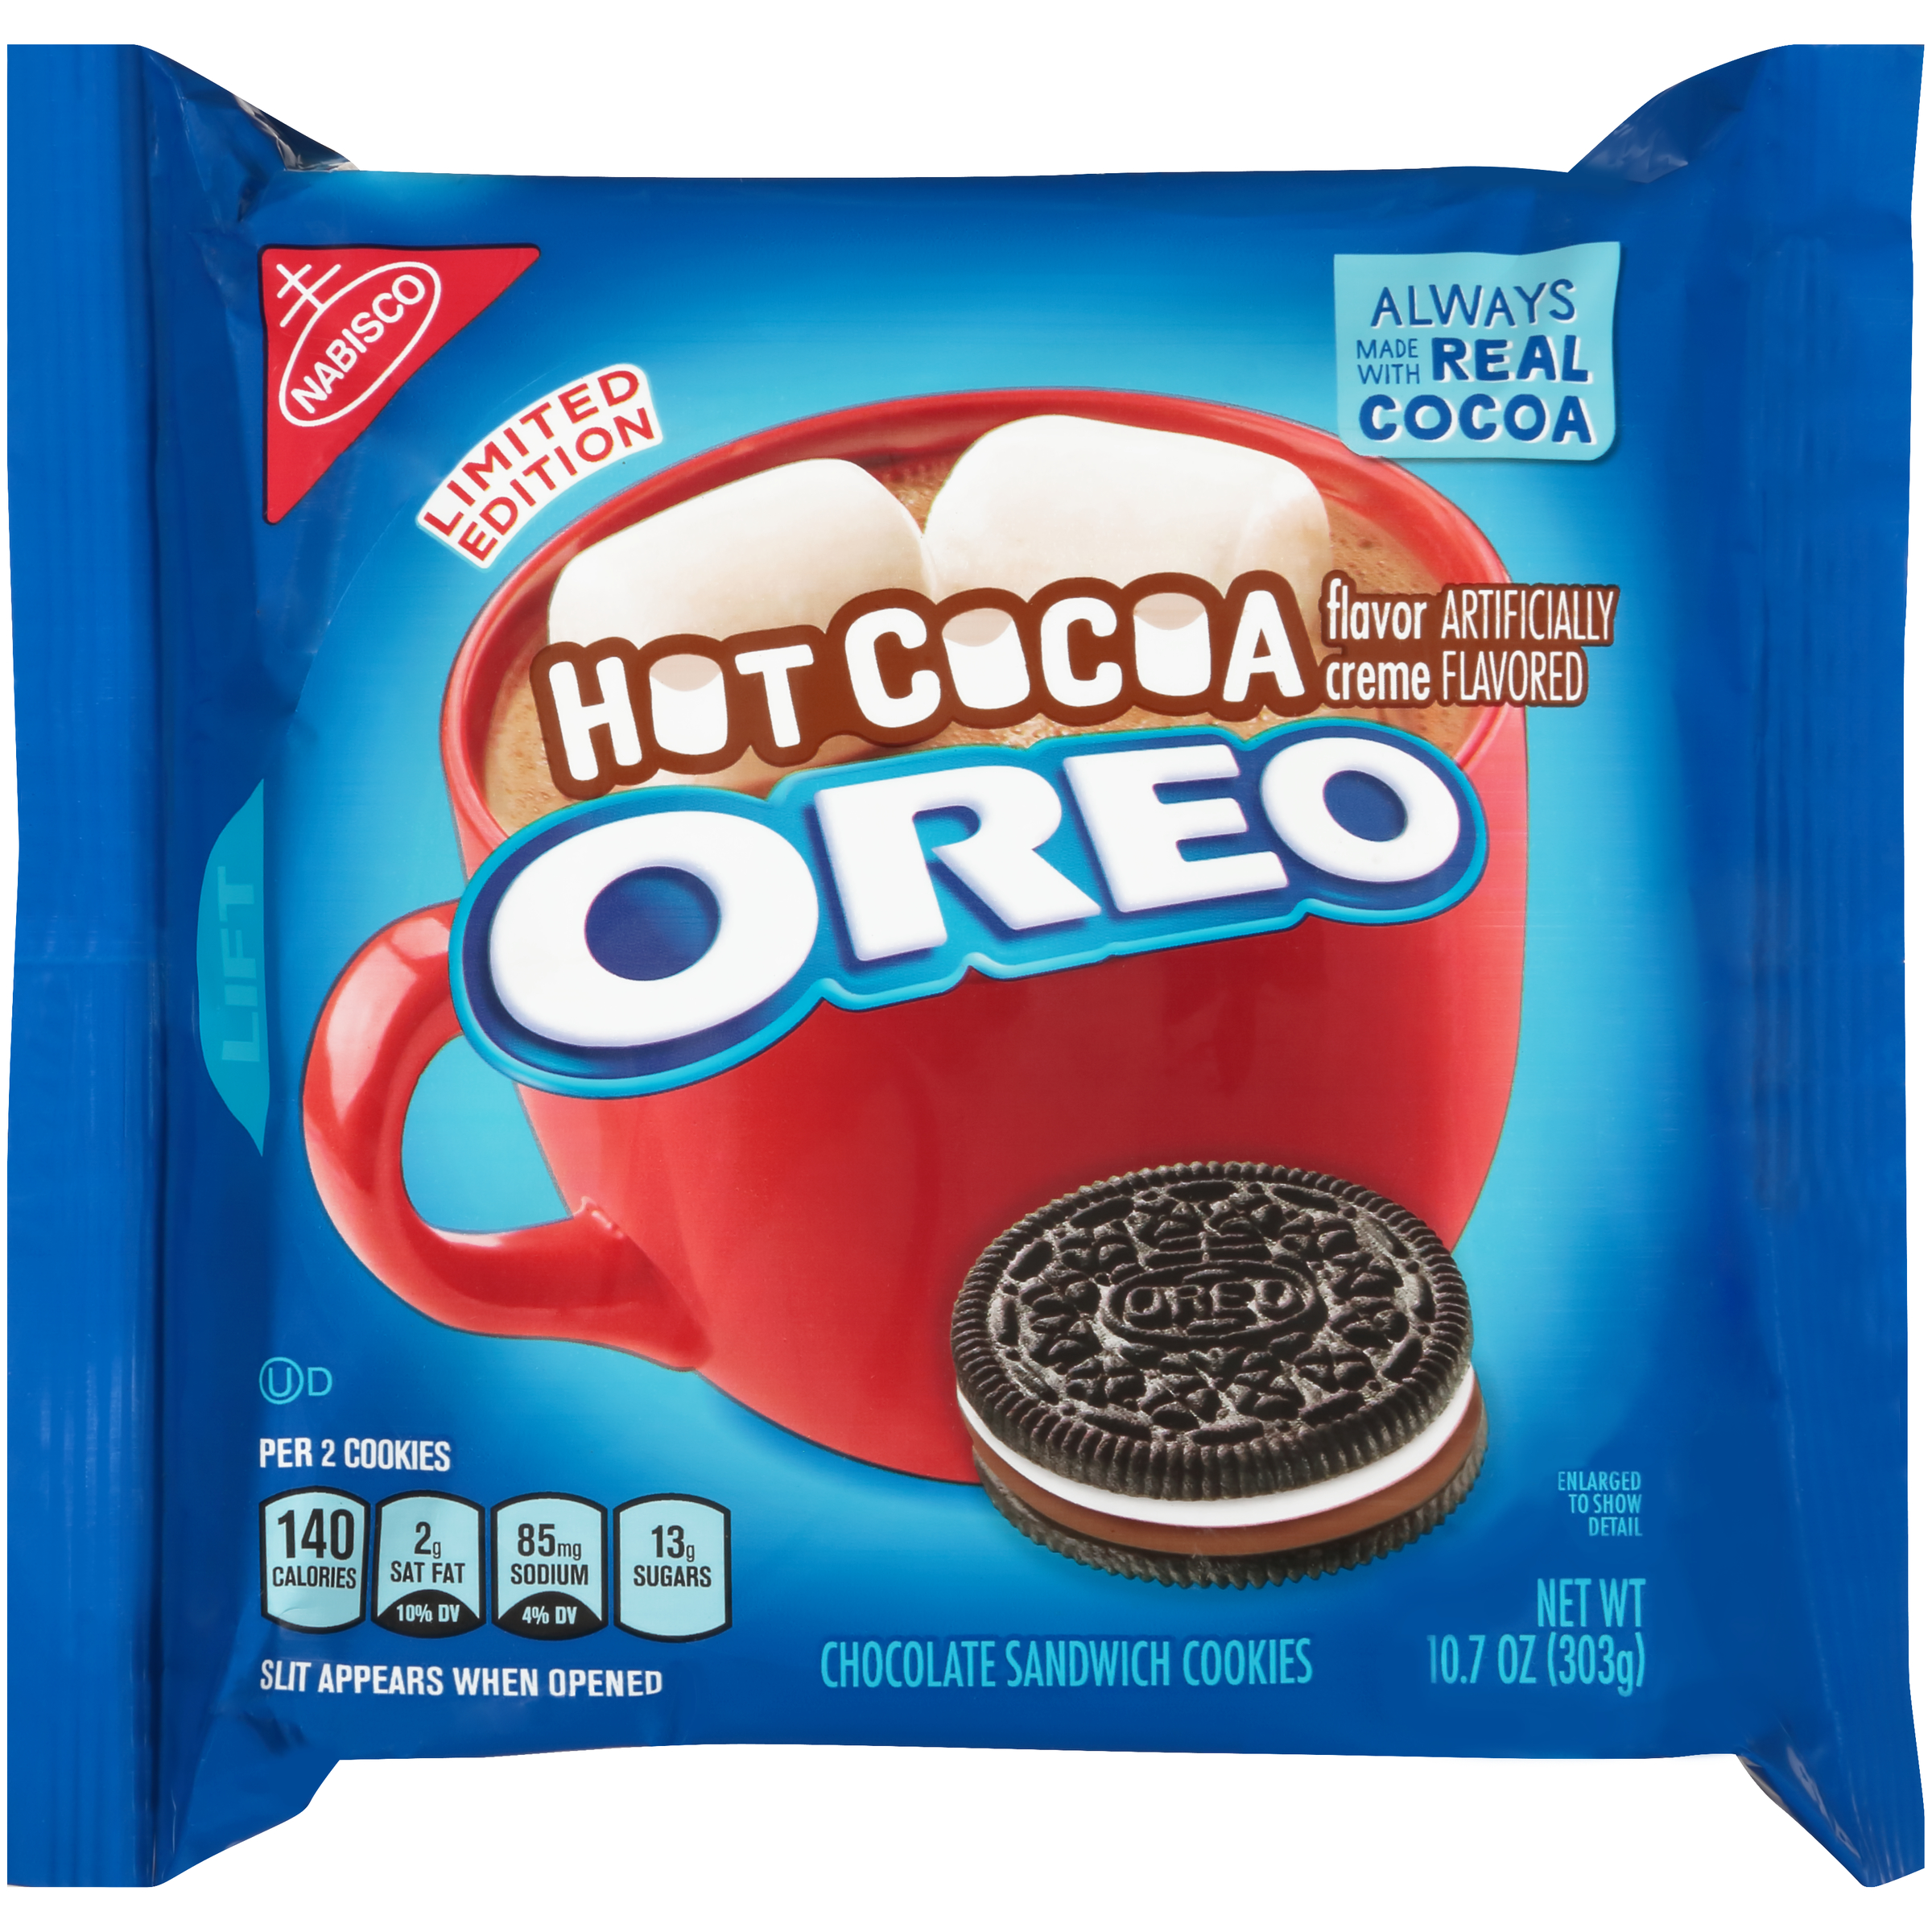 Oreo Nabisco  Limited Edition Hot Cocoa Chocolate Sandwich Cookies, 10.7 Oz. Tray